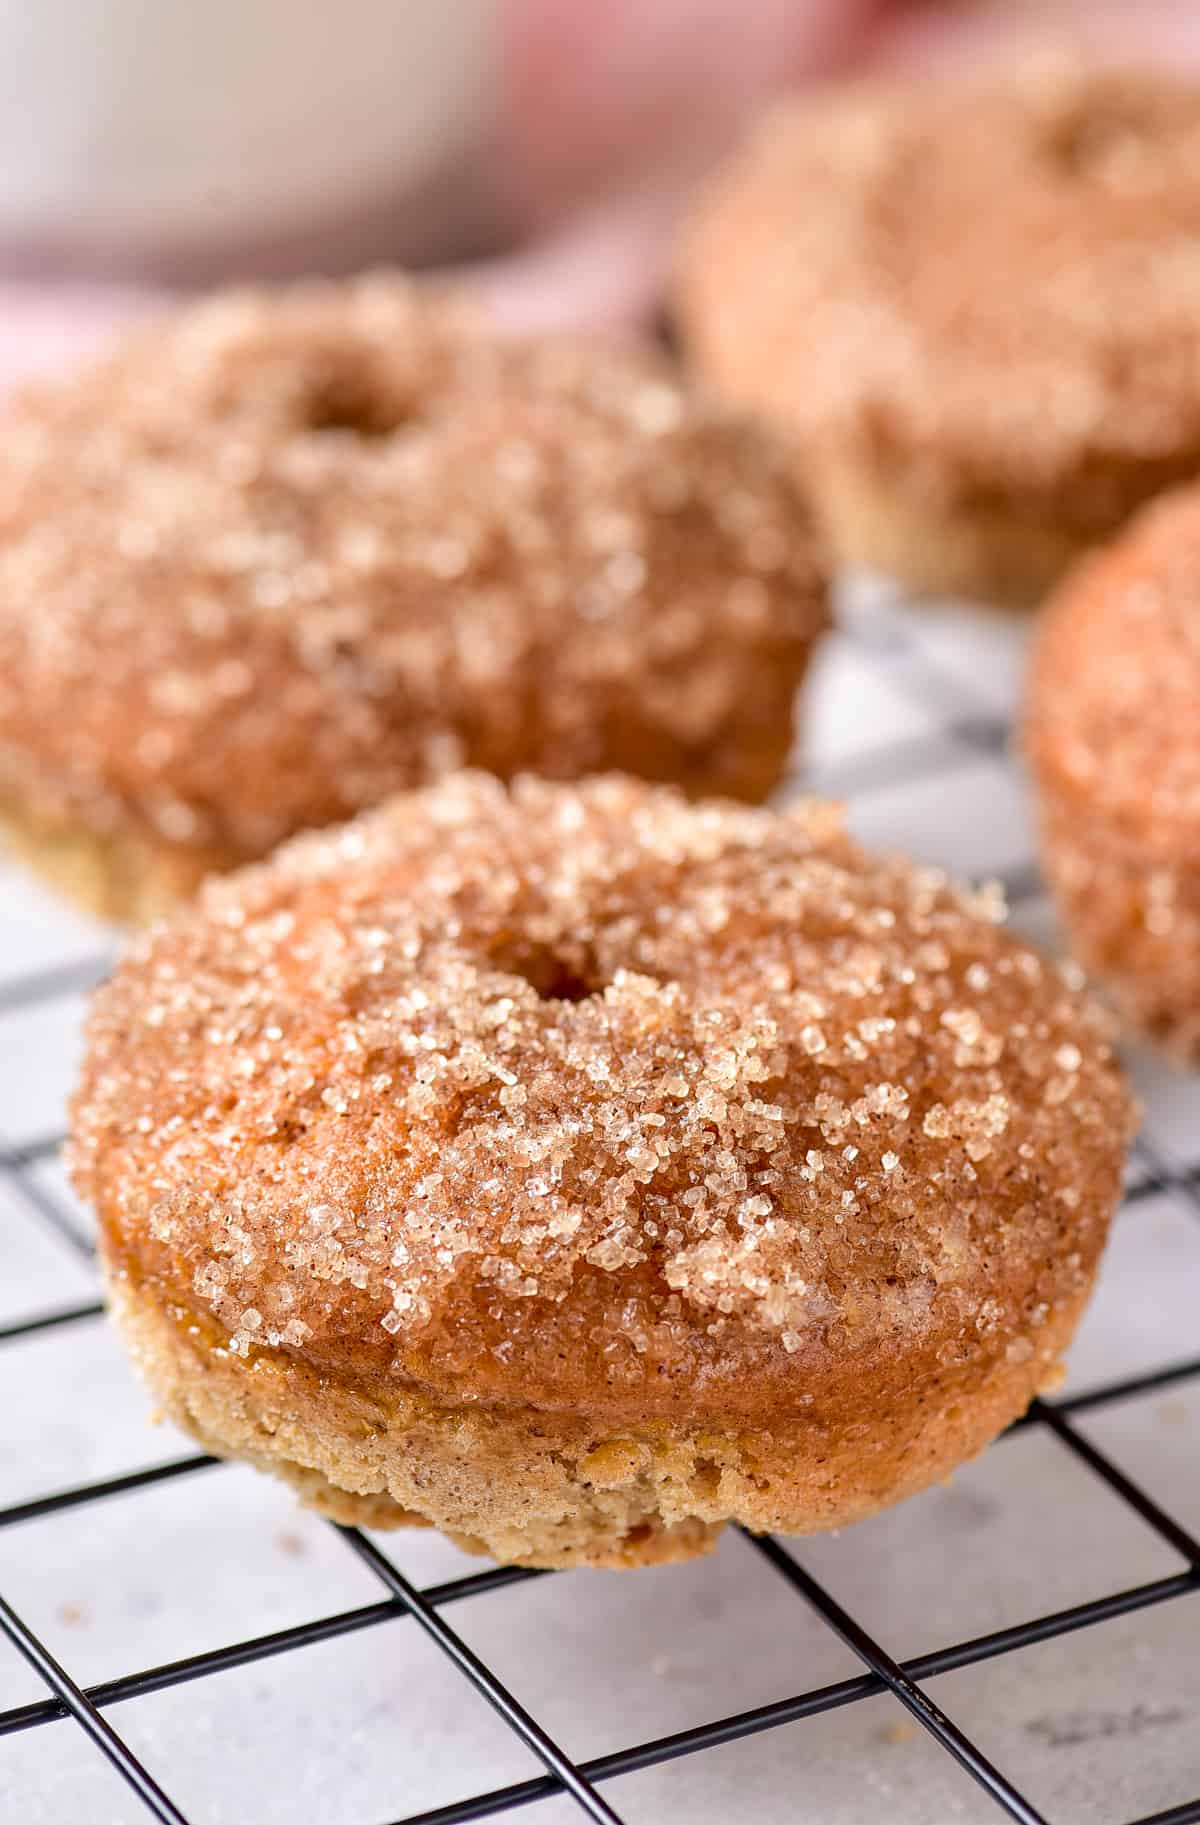 Finished Baked Cinnamon Apple Donuts on wire rack topped with cinnamon sugar.